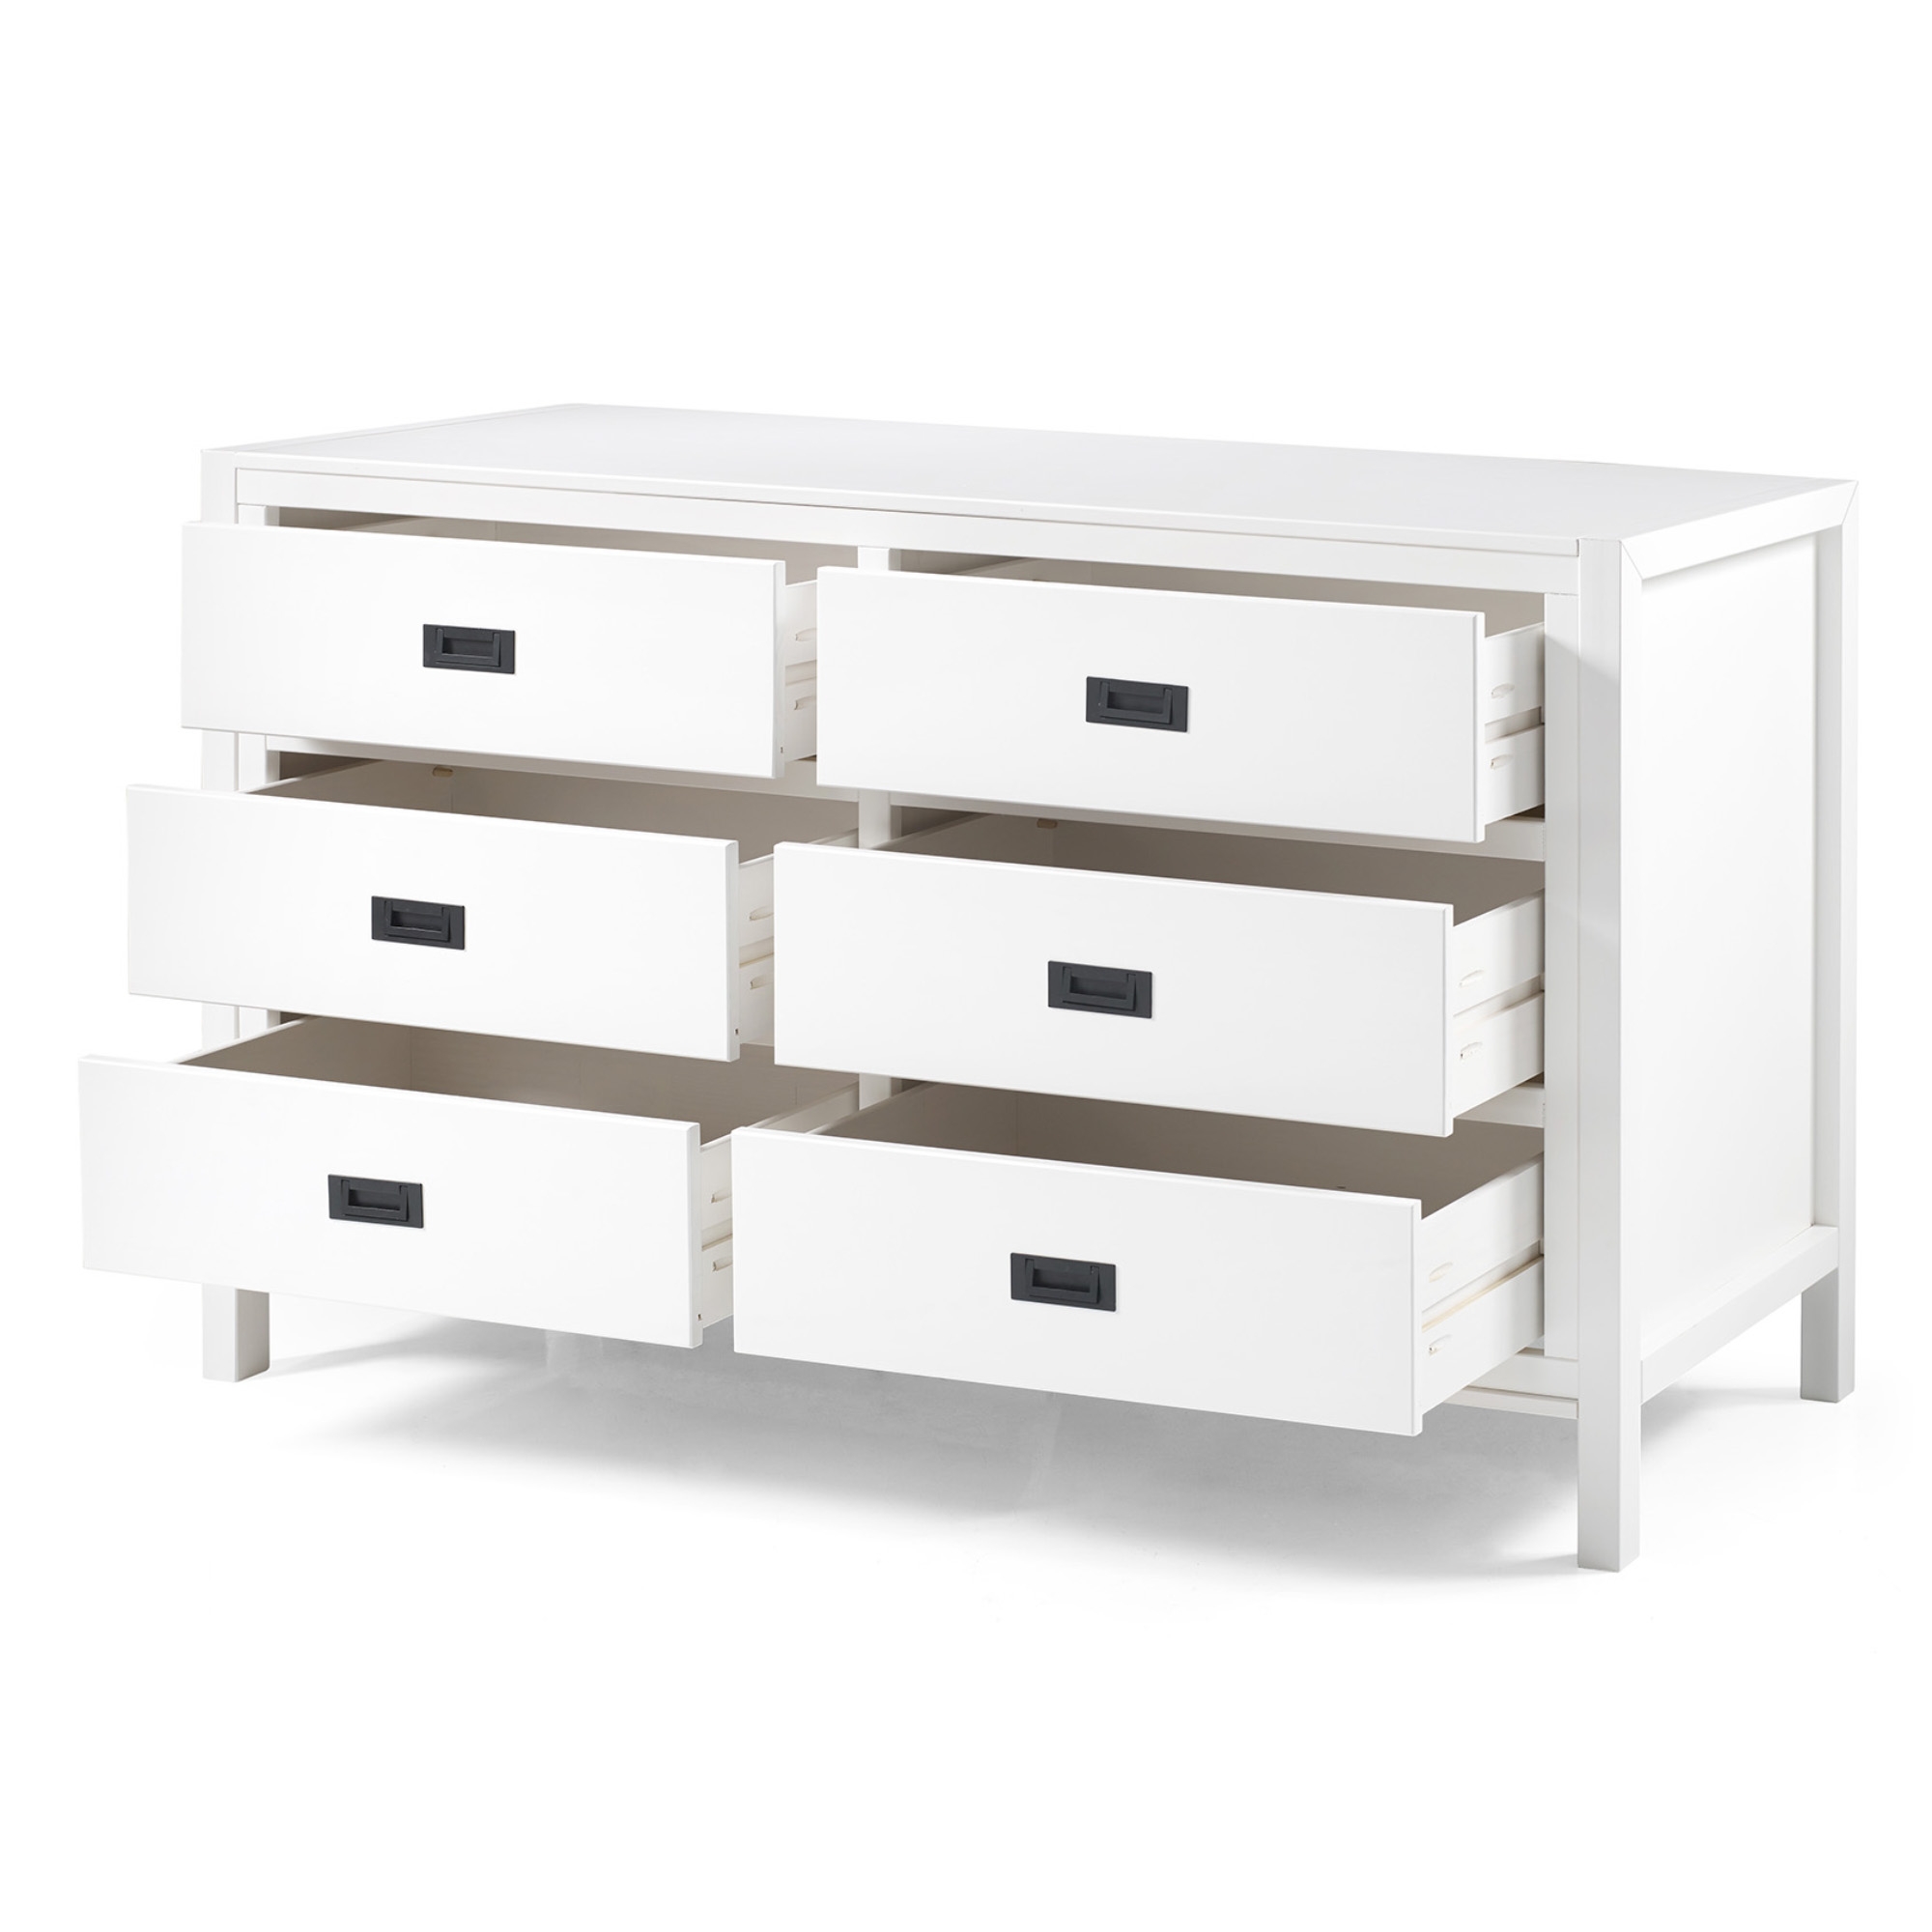 Lydia 57" Classic Solid Wood 6 Drawer Dresser - White - Image 2